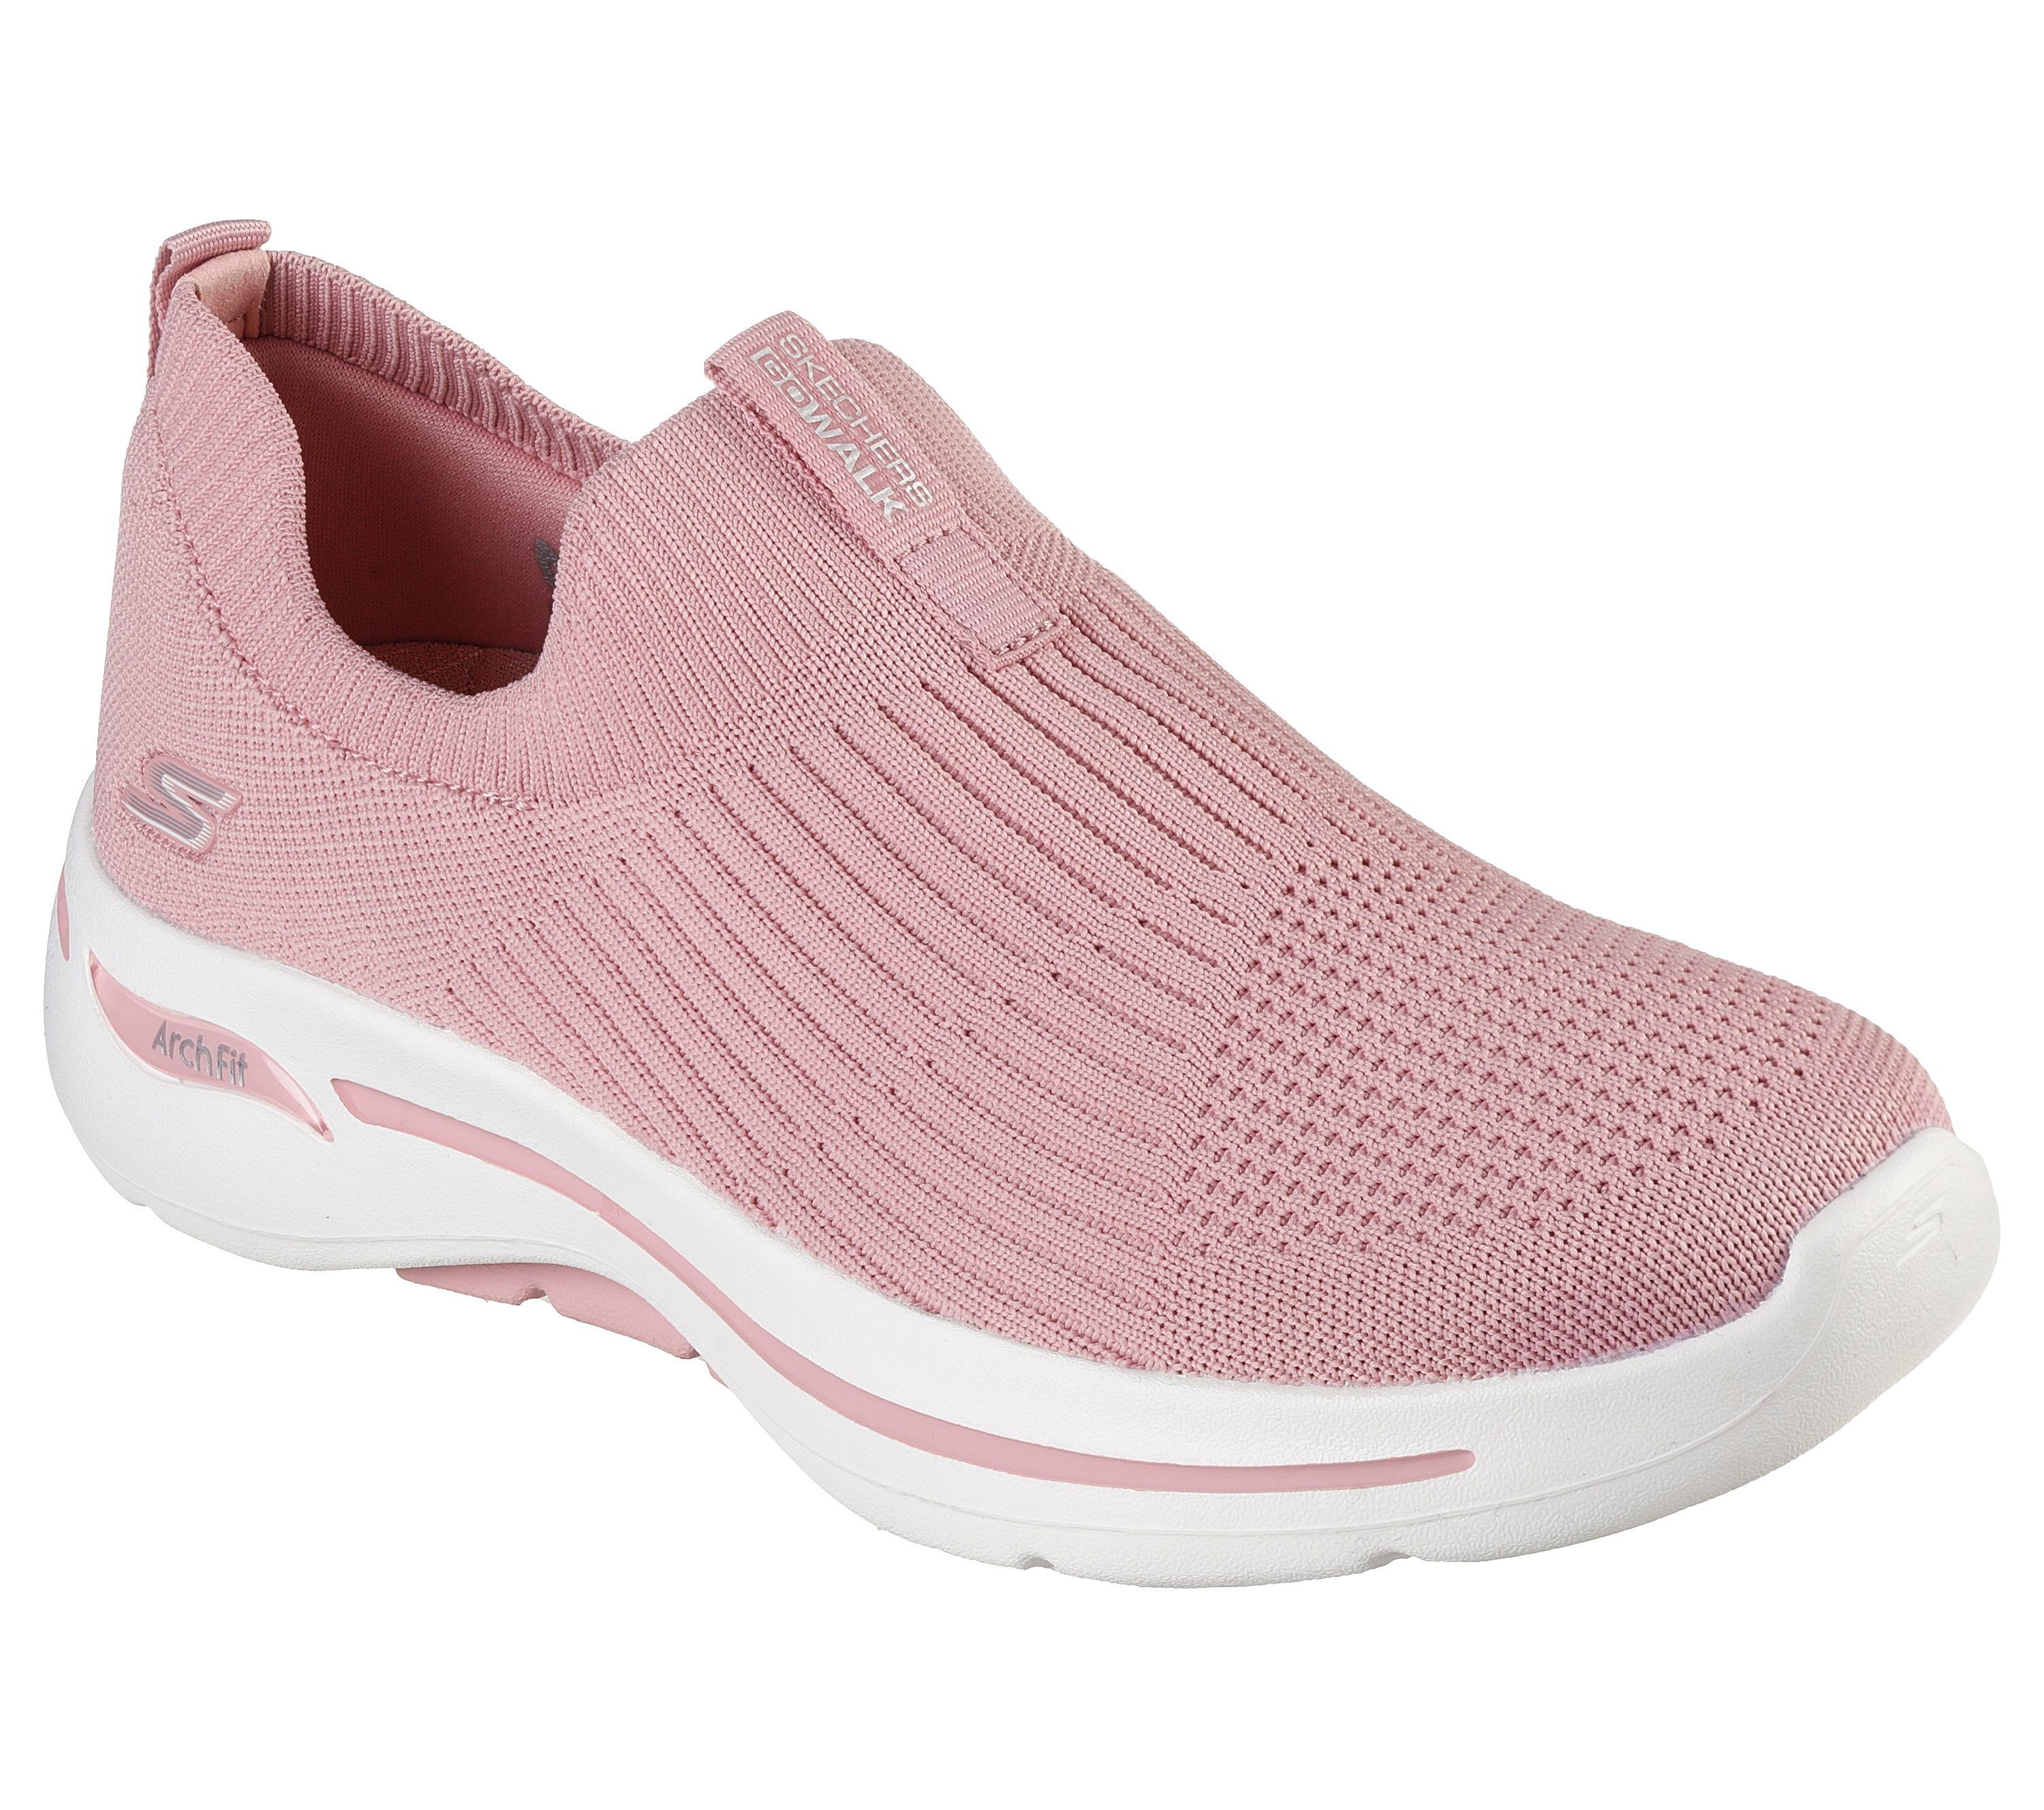 Skechers Arch Fit Glide-Step - Top Glory